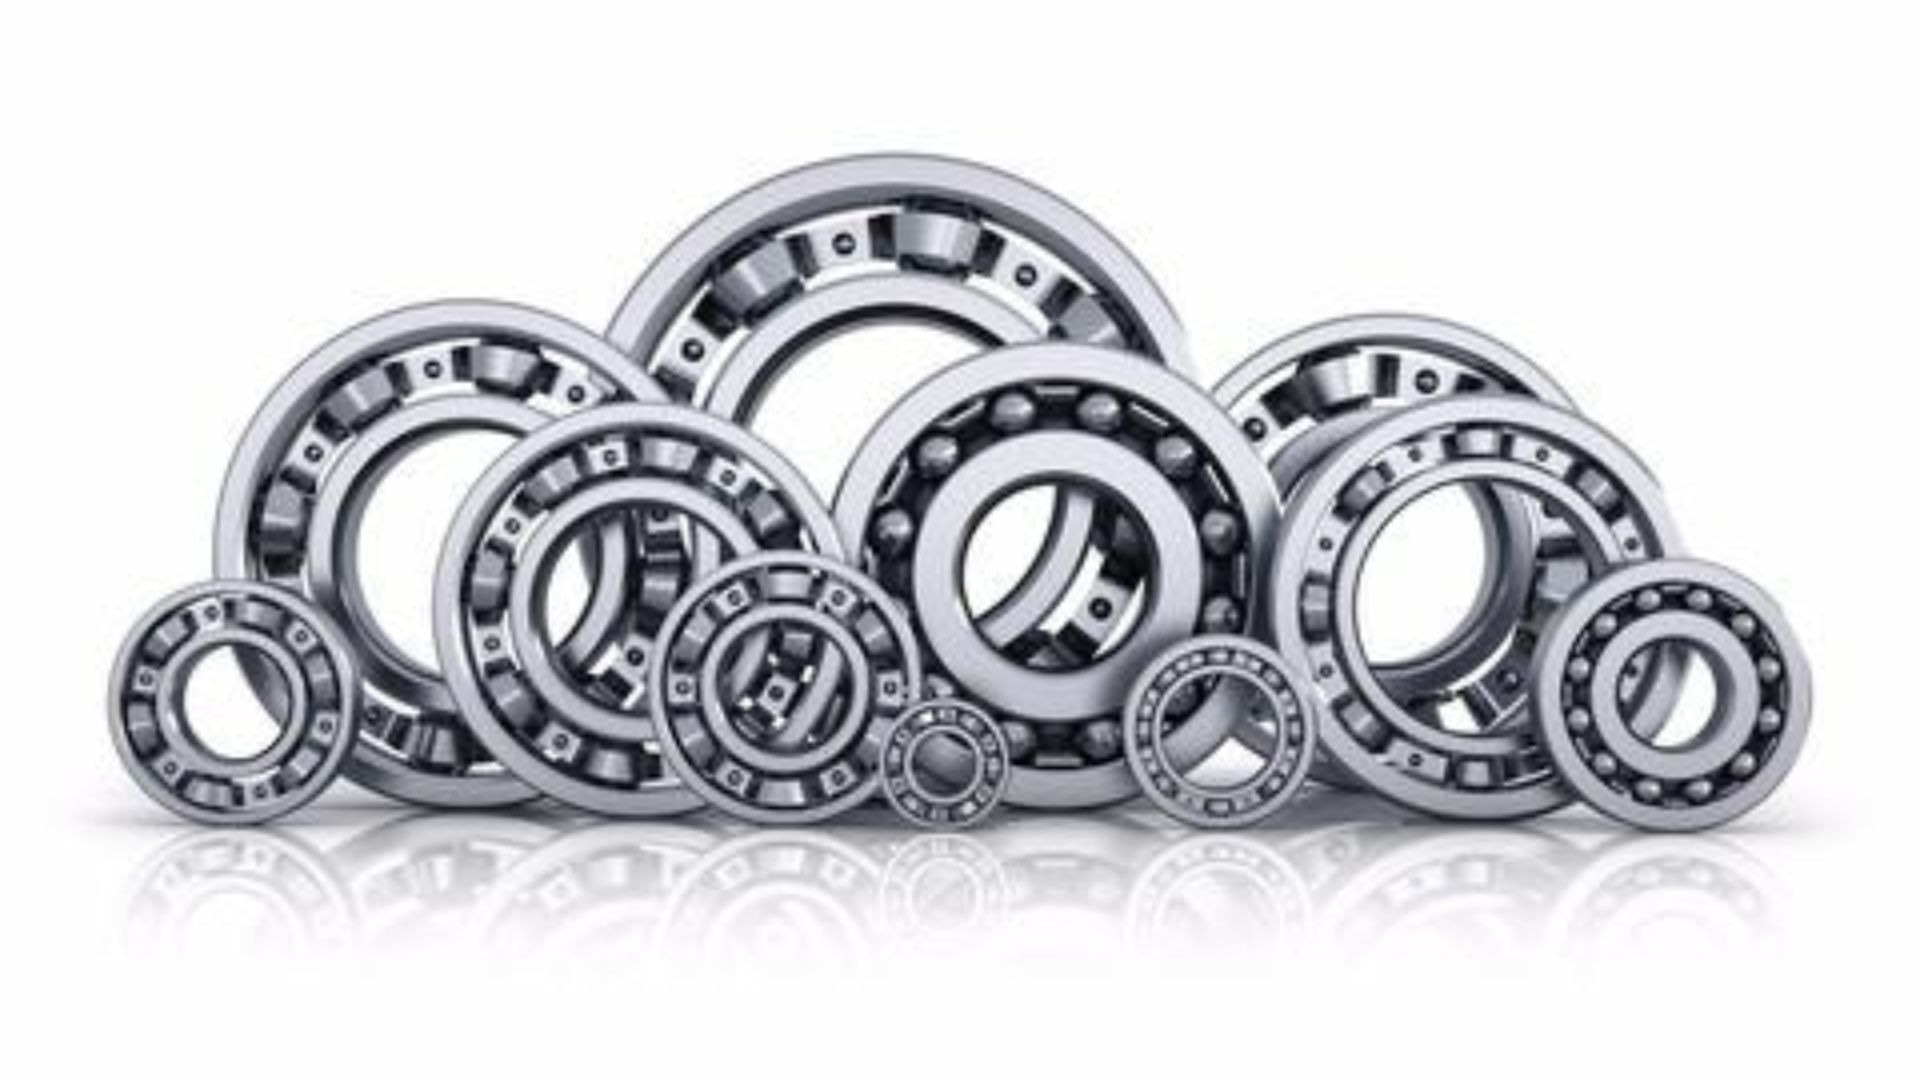 Bearing Suppliers Unveiled